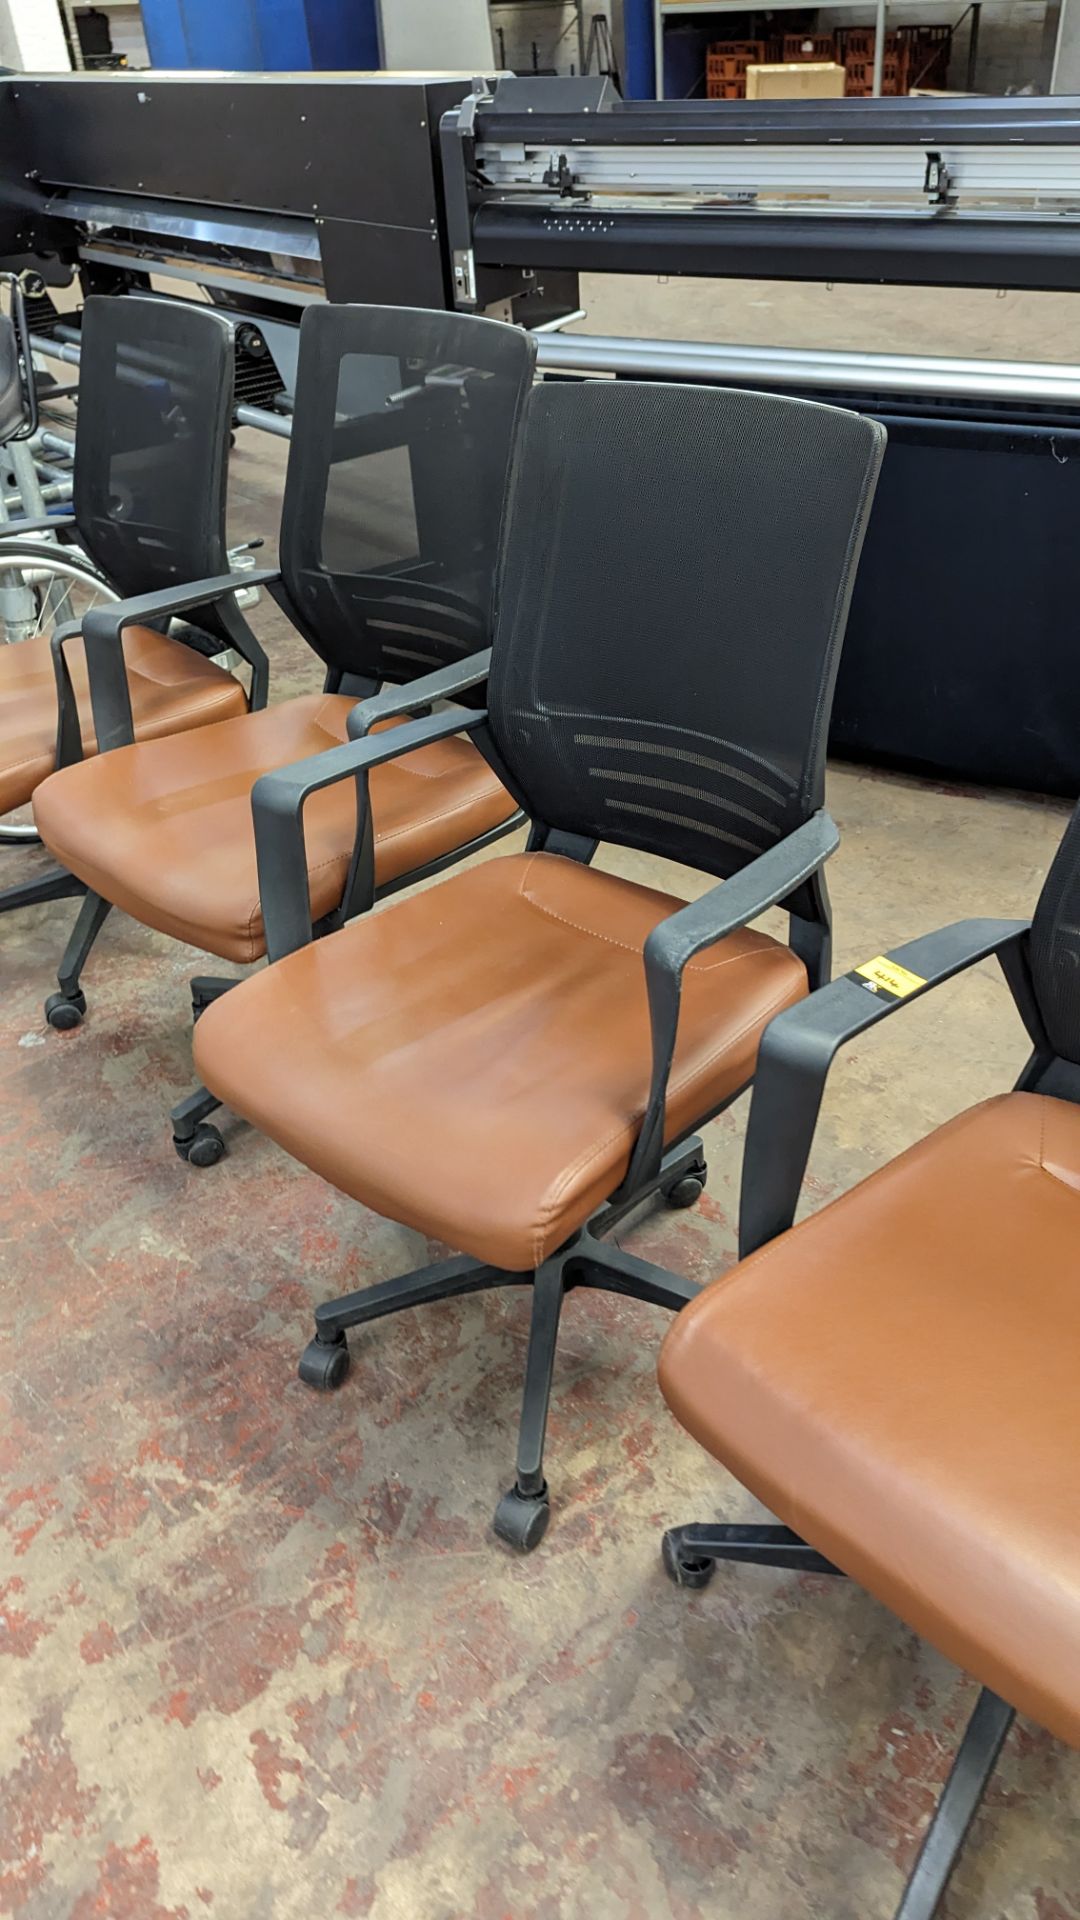 4 off matching modern mesh back chairs with brown leather/leather look seat bases, one of which has - Image 6 of 10